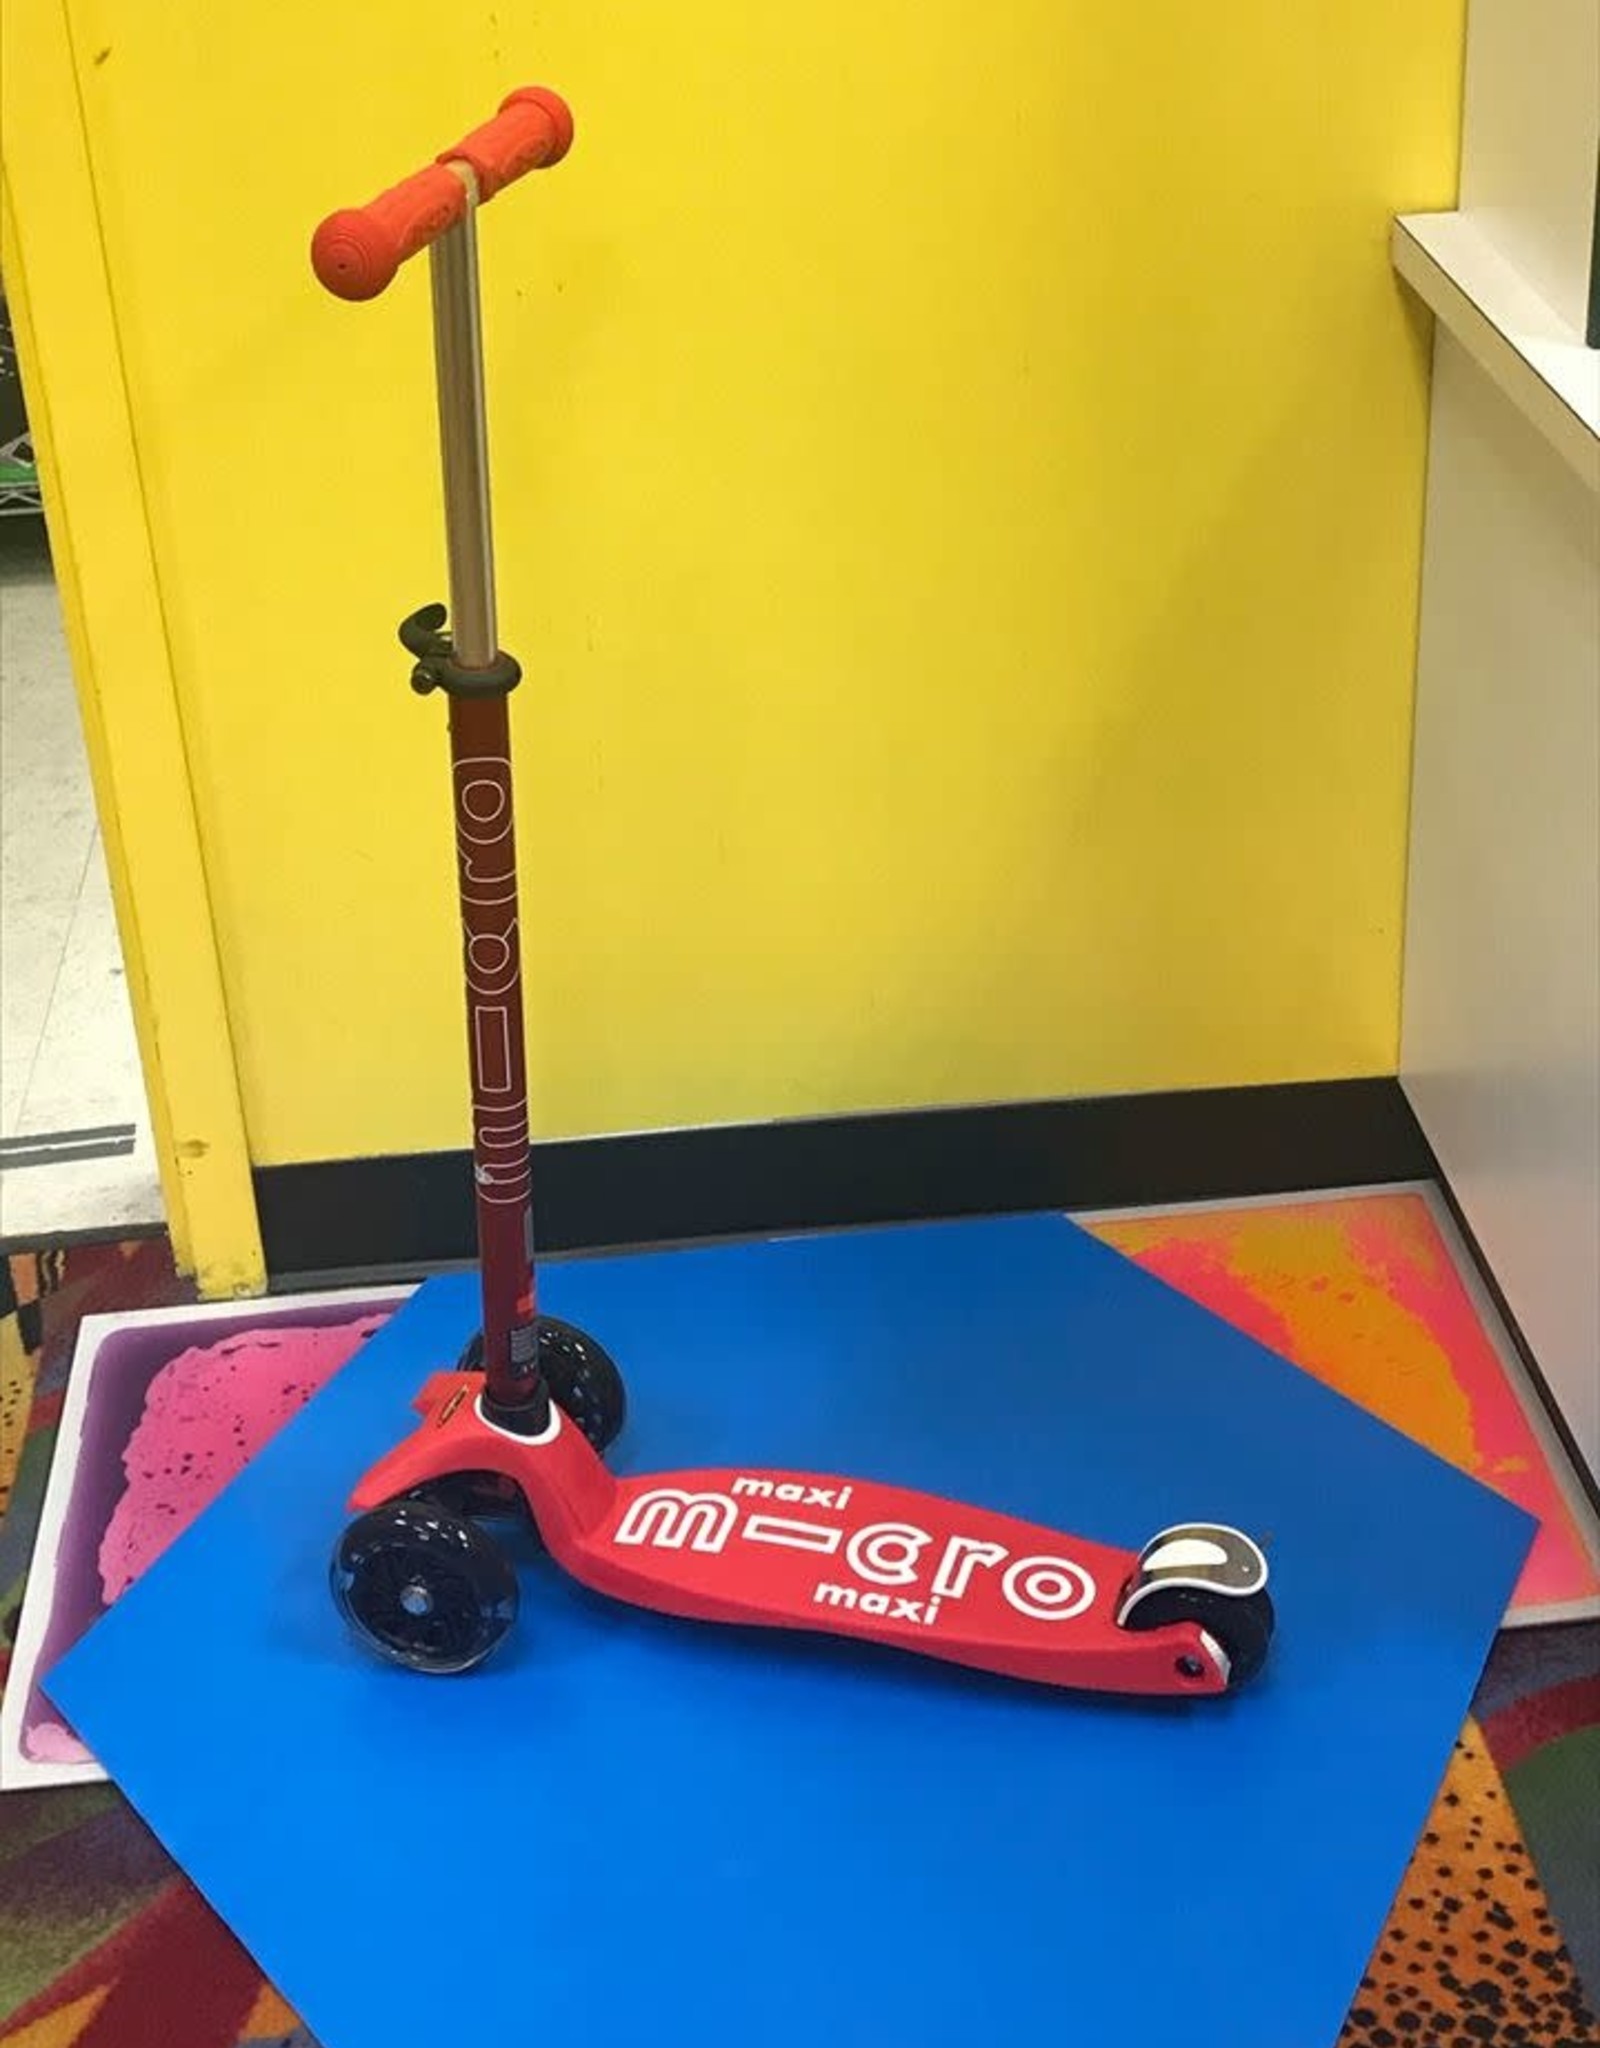 MICROSCOOTER MAXI MICRO LED RED SCOOTER